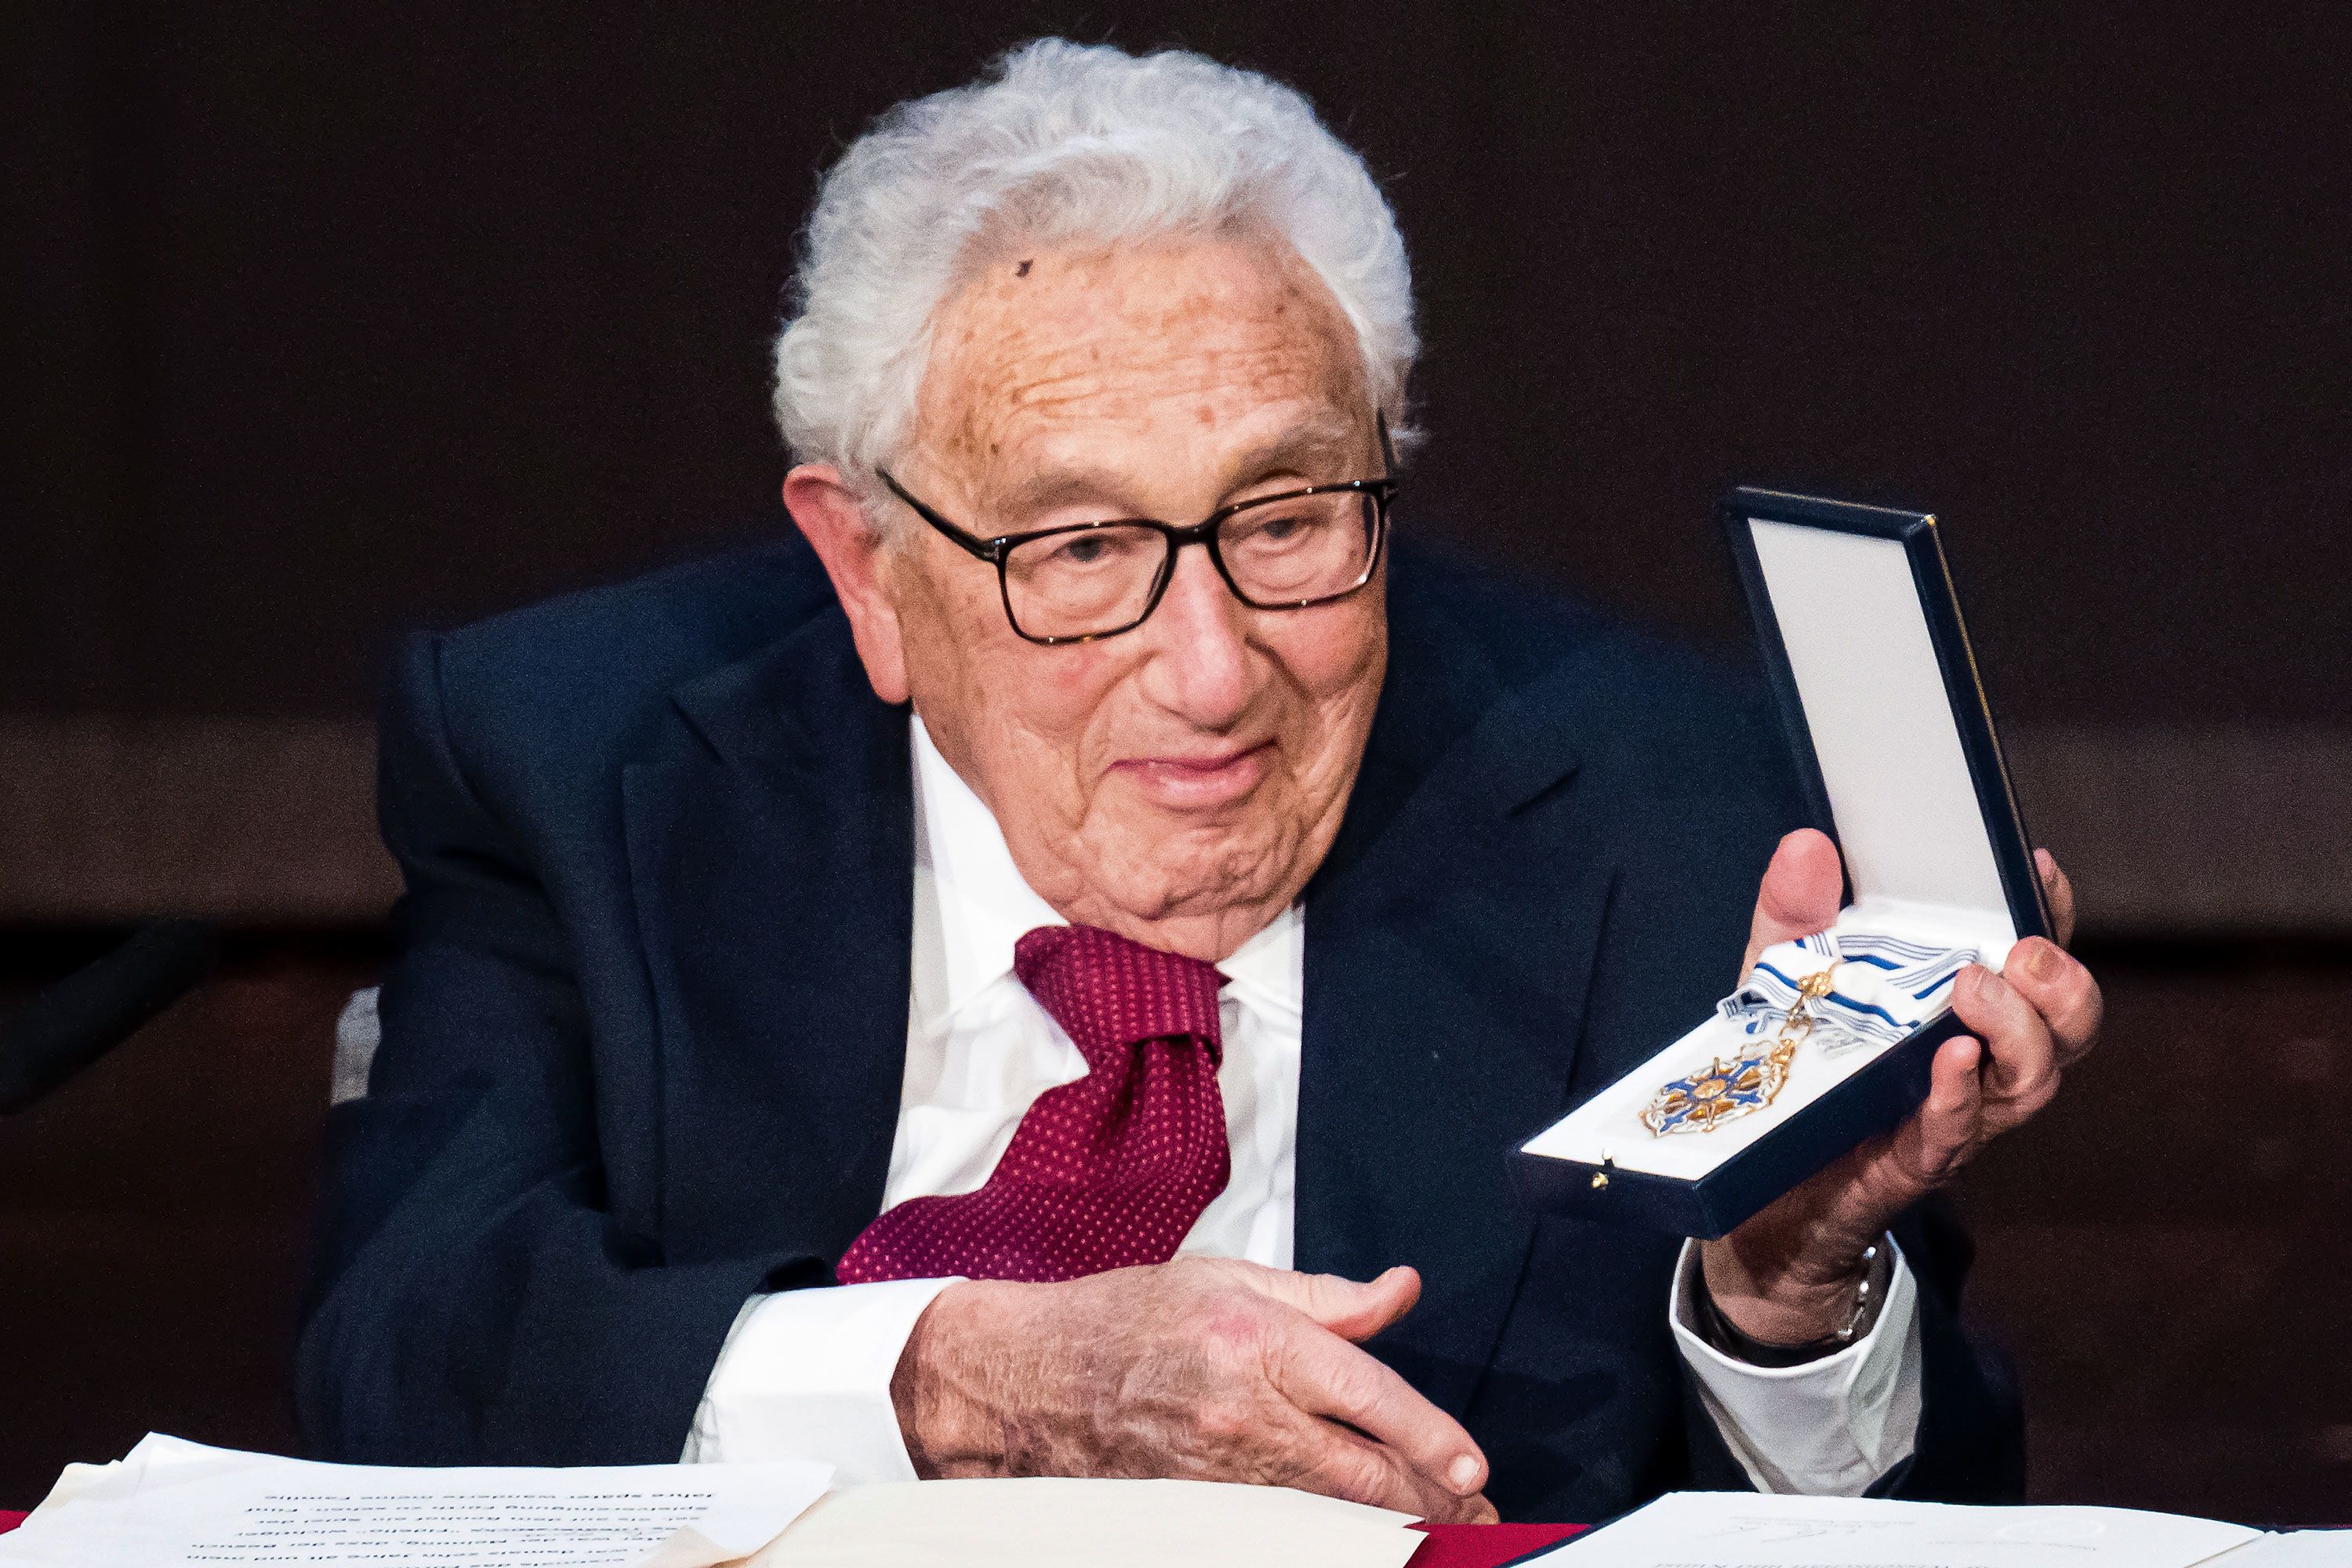 Kissinger receives the Bavarian Order of Maximilian for Science and the Arts during a reception at his birthplace of Fürth, Germany, in June 2023.